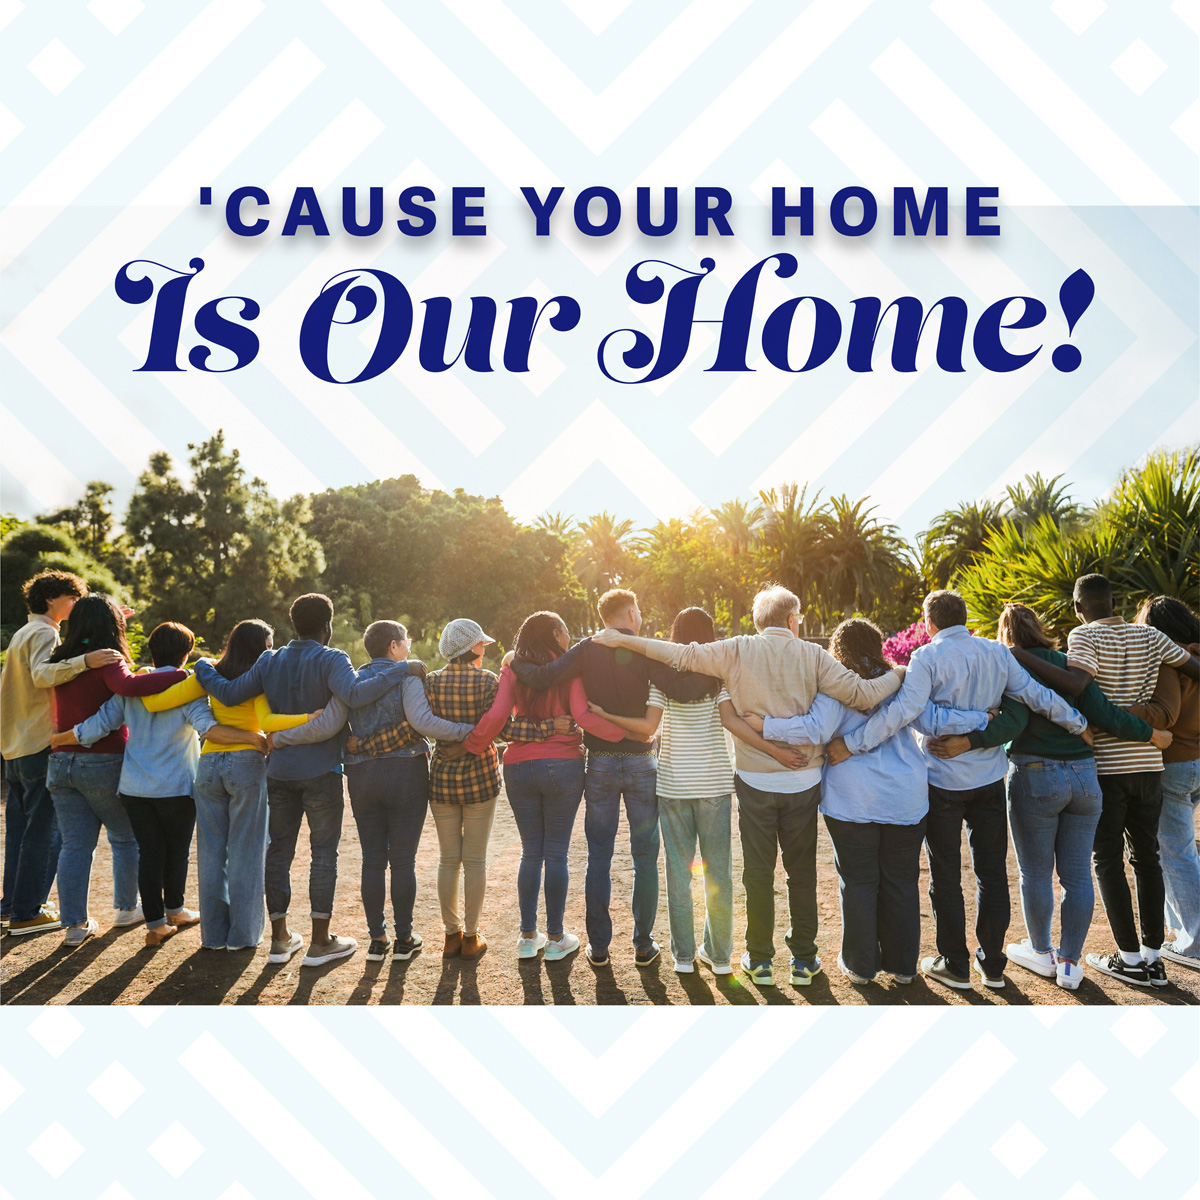 Stick with the experts when it comes to finances. Your family home is a treasure, and we treat it as such. For a top-notch mortgage experience, look no further than your own community! #wilsonwholesalemortgage #investment #mortgageloan Text 'Investors' to 33655 for more info!